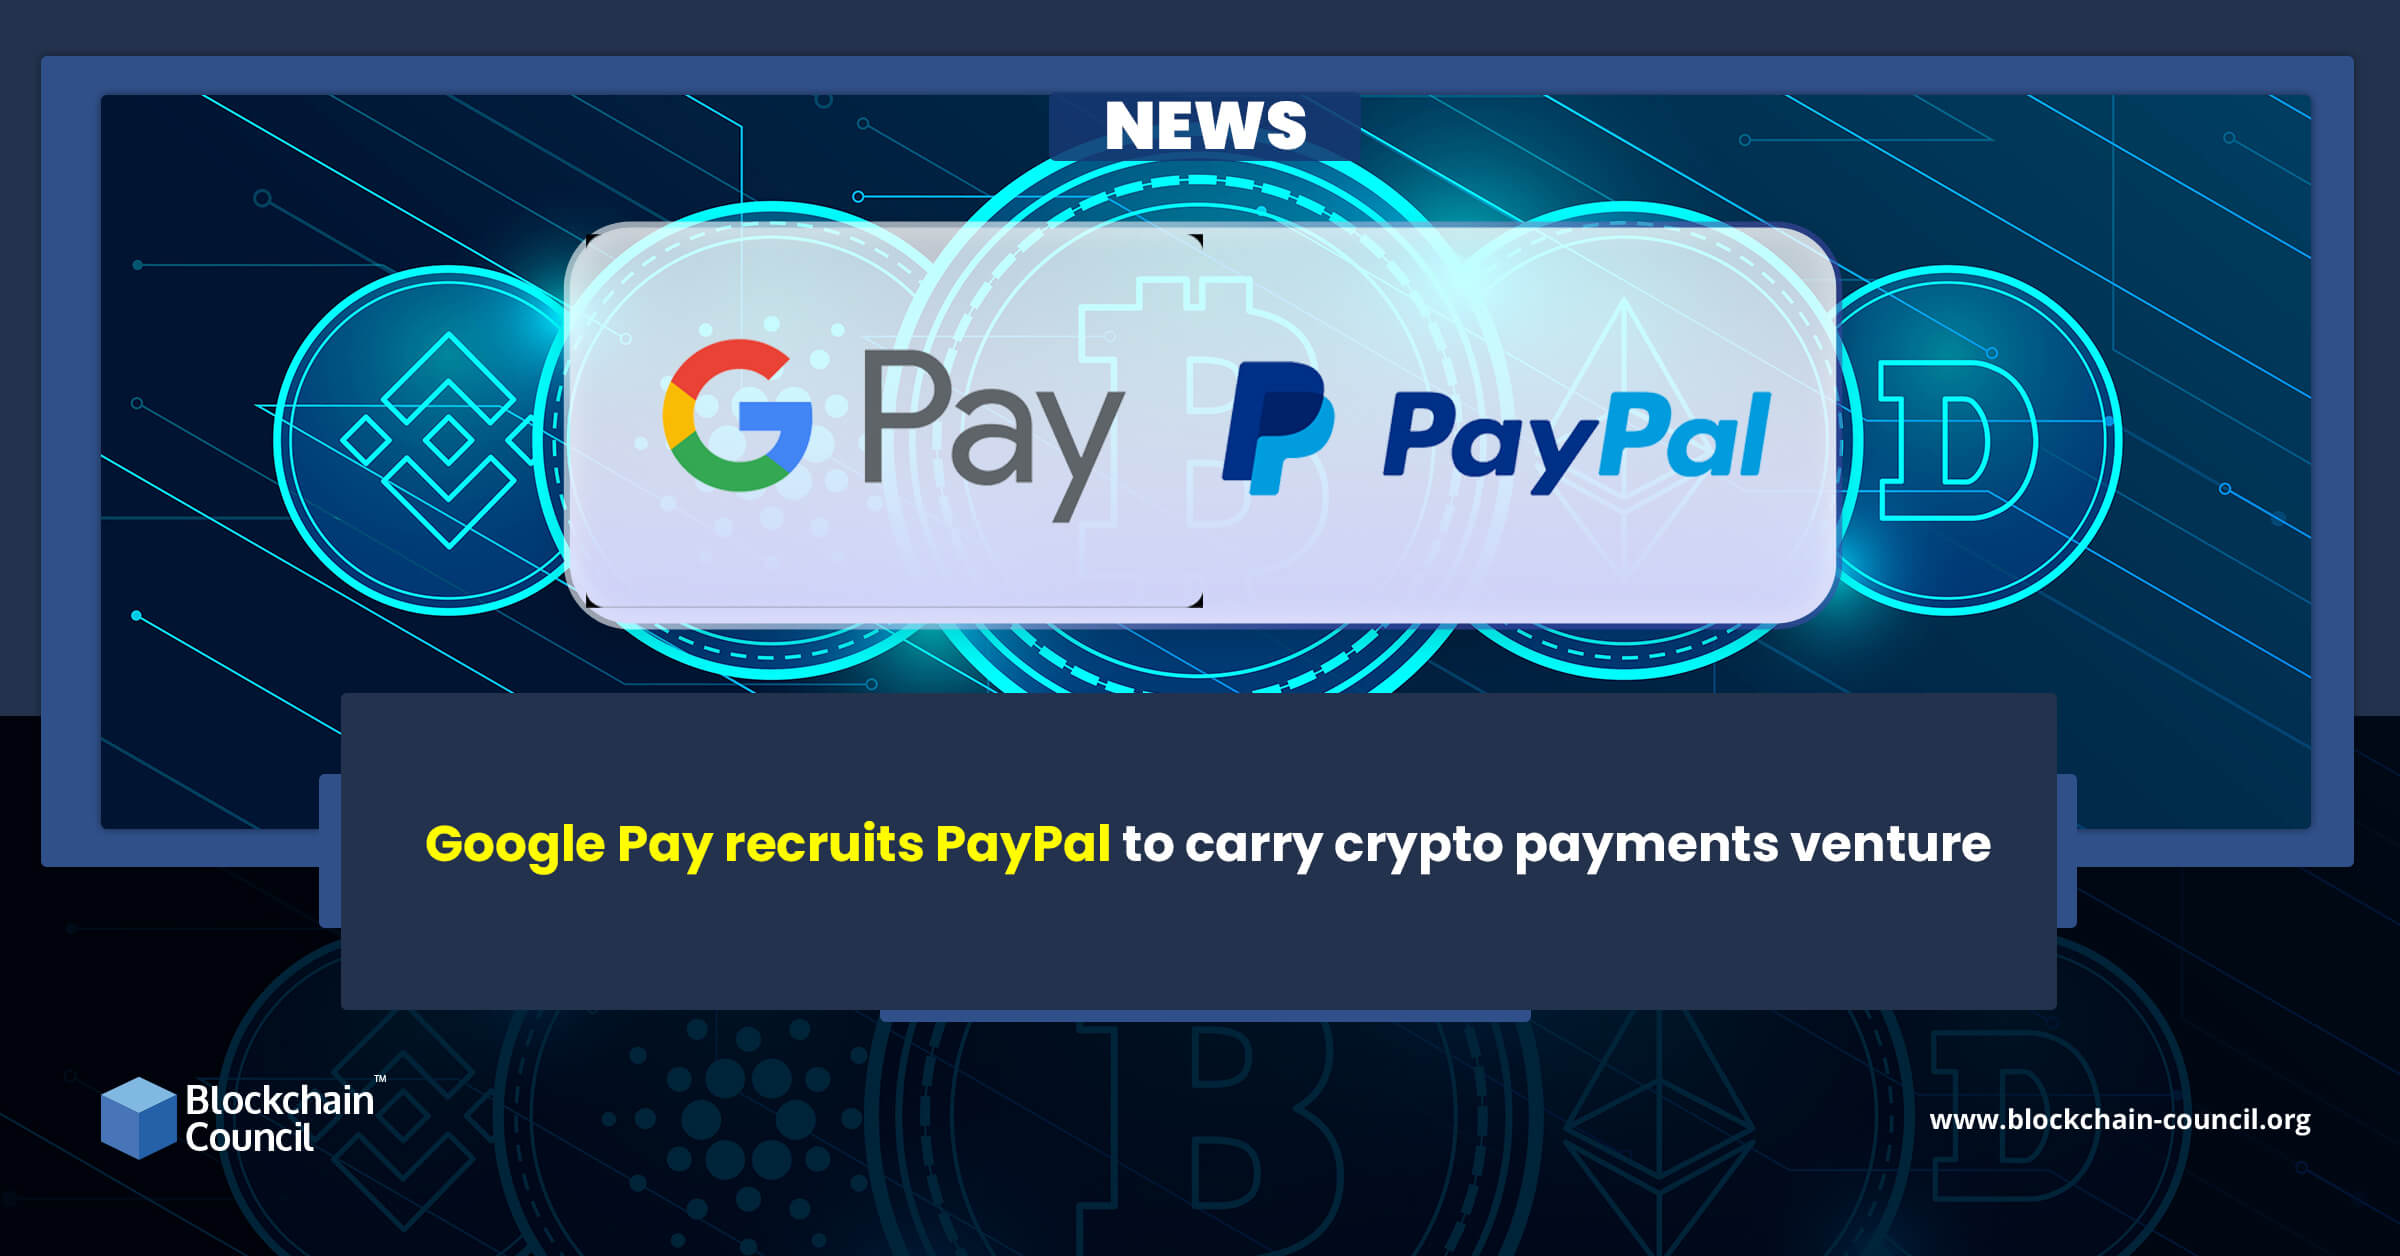 Google Pay recruits PayPal to carry crypto payments venture